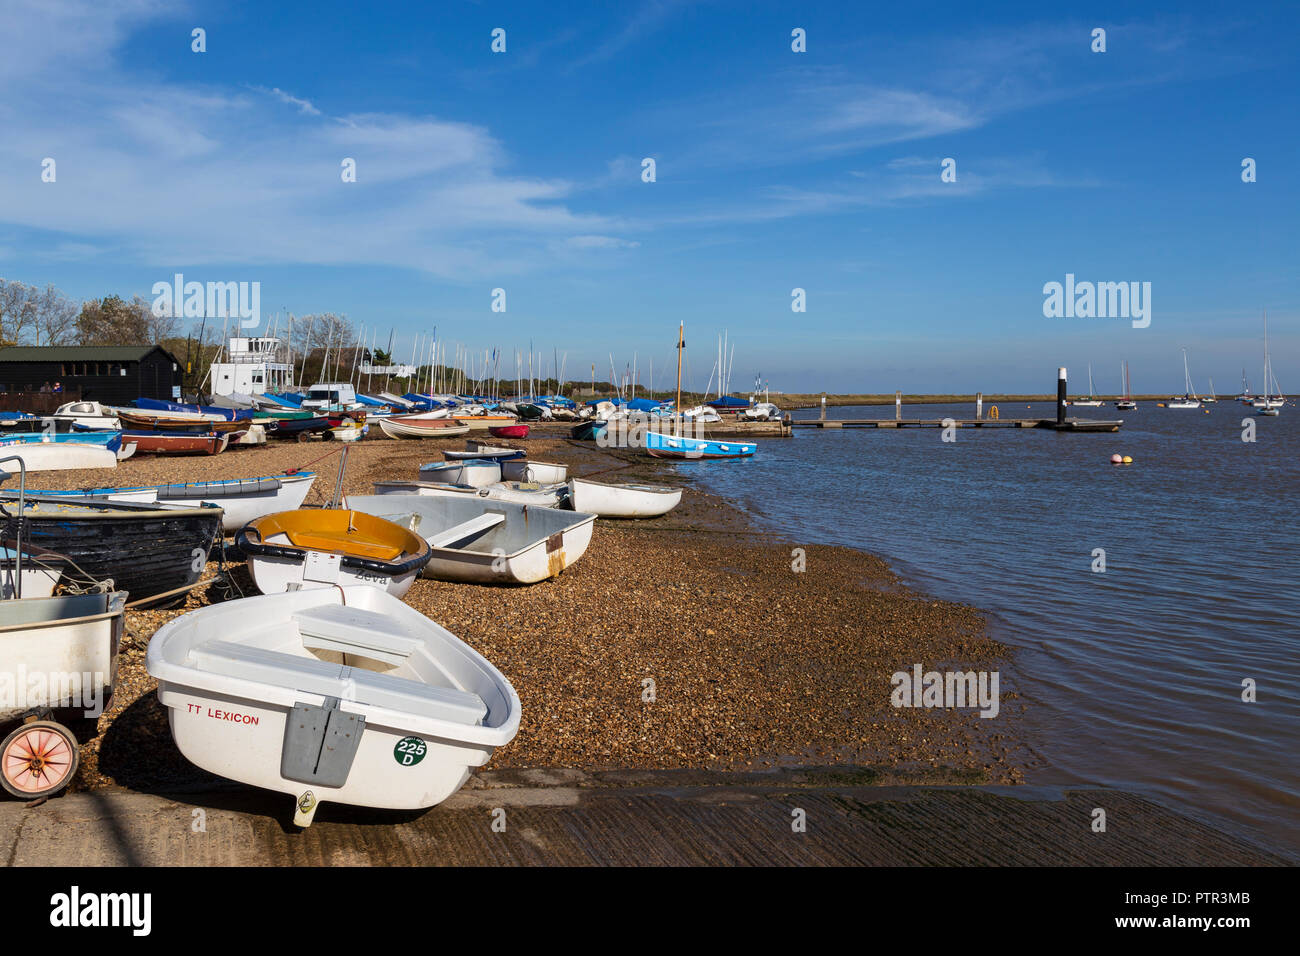 Dinghies and Sailing Boats on the Beach of the River Ore Separating Orford from Orford Ness on a Very Sunny October Afternoon Stock Photo